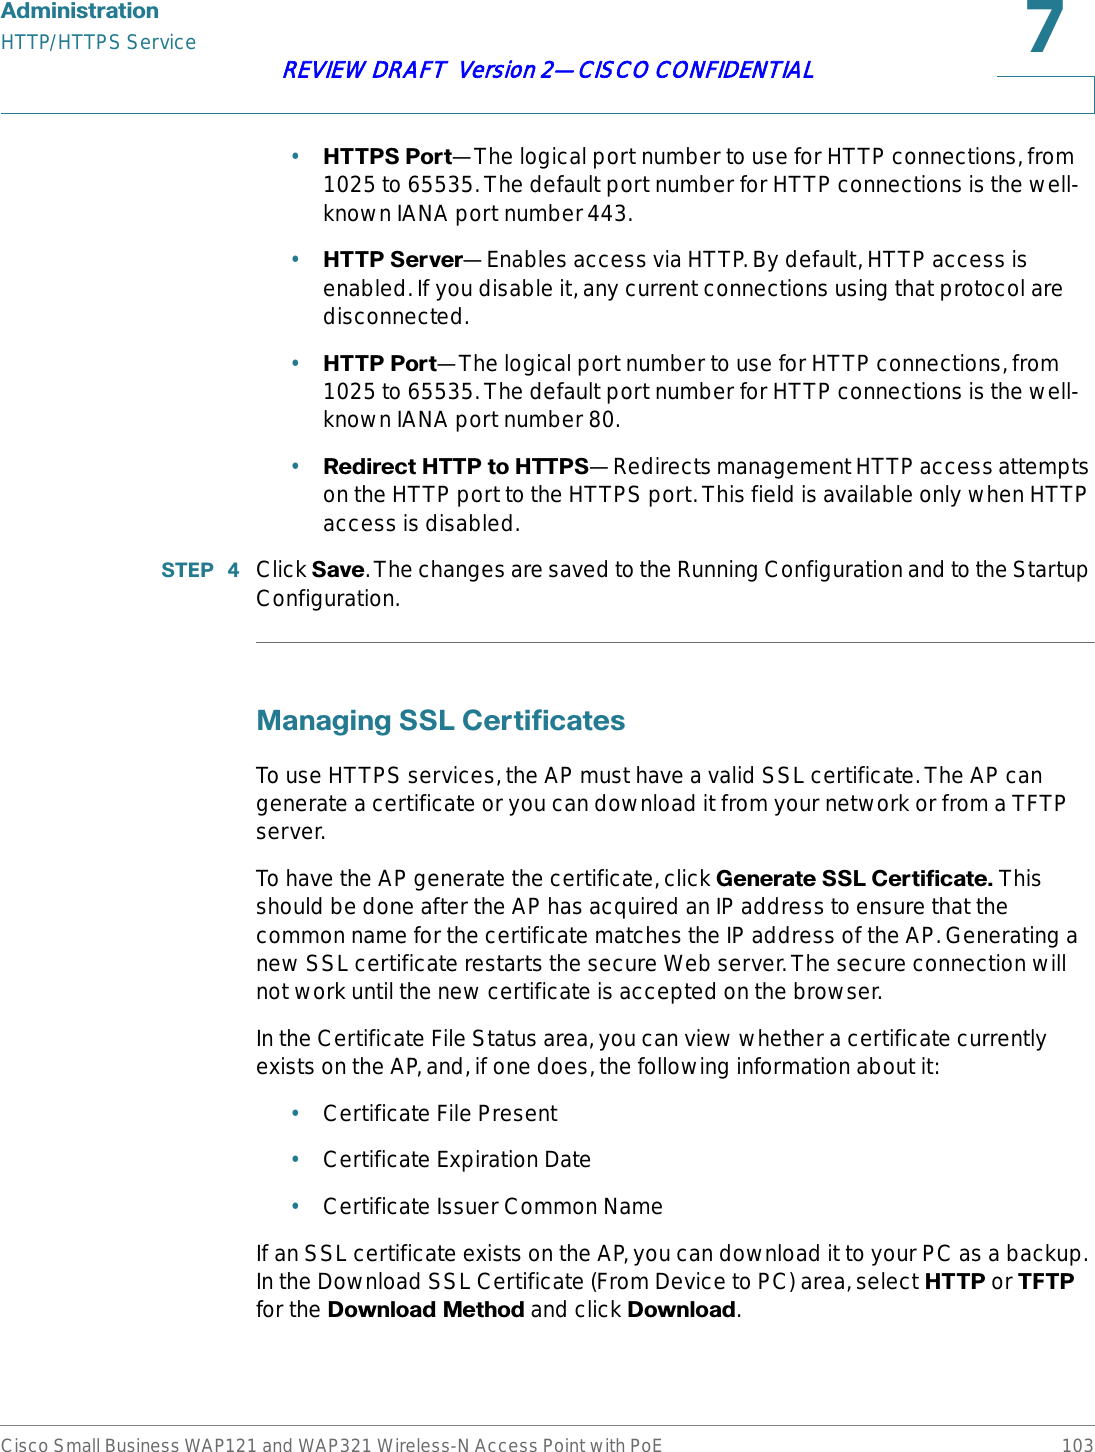 $GPLQLVWUDWLRQHTTP/HTTPS ServiceCisco Small Business WAP121 and WAP321 Wireless-N Access Point with PoE 103REVIEW DRAFT  Version 2—CISCO CONFIDENTIAL•+77363RUW—The logical port number to use for HTTP connections, from 1025 to 65535. The default port number for HTTP connections is the well-known IANA port number443. •+7736HUYHU—Enables access via HTTP. By default, HTTP access is enabled. If you disable it, any current connections using that protocol are disconnected.•+7733RUW—The logical port number to use for HTTP connections, from 1025 to 65535. The default port number for HTTP connections is the well-known IANA port number 80. •5HGLUHFW+773WR+7736—Redirects management HTTP access attempts on the HTTP port to the HTTPS port. This field is available only when HTTP access is disabled.67(3  Click 6DYH. The changes are saved to the Running Configuration and to the Startup Configuration.0DQDJLQJ66/&amp;HUWLILFDWHVTo use HTTPS services, the AP must have a valid SSL certificate. The AP can generate a certificate or you can download it from your network or from a TFTP server. To have the AP generate the certificate, click *HQHUDWH66/&amp;HUWLILFDWH This should be done after the AP has acquired an IP address to ensure that the common name for the certificate matches the IP address of the AP. Generating a new SSL certificate restarts the secure Web server. The secure connection will not work until the new certificate is accepted on the browser.In the Certificate File Status area, you can view whether a certificate currently exists on the AP, and, if one does, the following information about it:•Certificate File Present•Certificate Expiration Date•Certificate Issuer Common NameIf an SSL certificate exists on the AP, you can download it to your PC as a backup. In the Download SSL Certificate (From Device to PC) area, select +773 or 7)73for the &apos;RZQORDG0HWKRG and click &apos;RZQORDG.